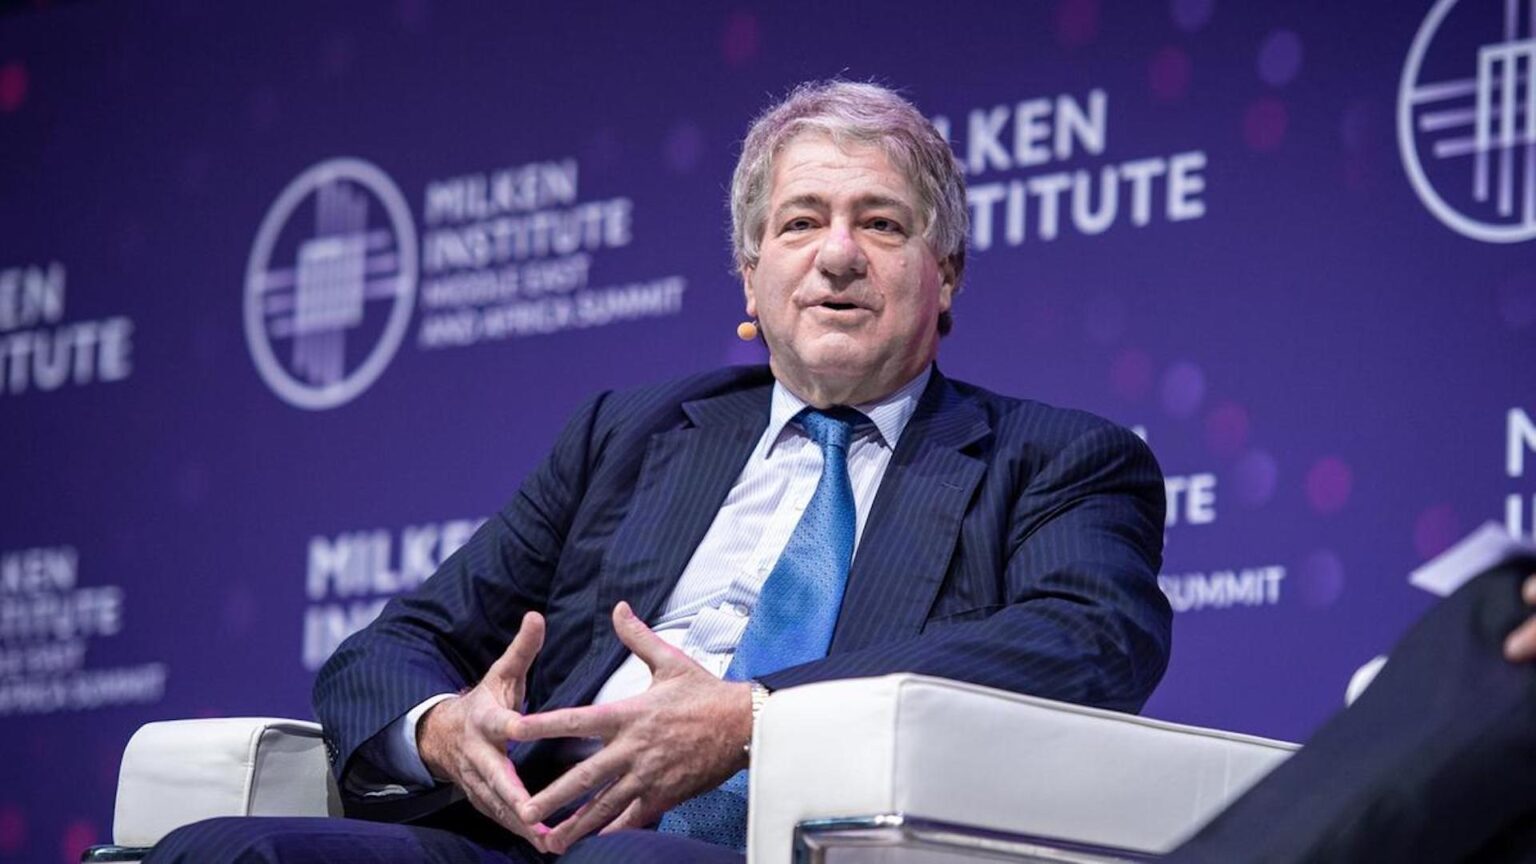 Leon Black is retiring as CEO of Apollo. Is it because of his relationship with disgraced financier Jeffrey Epstein? Read all the details here.